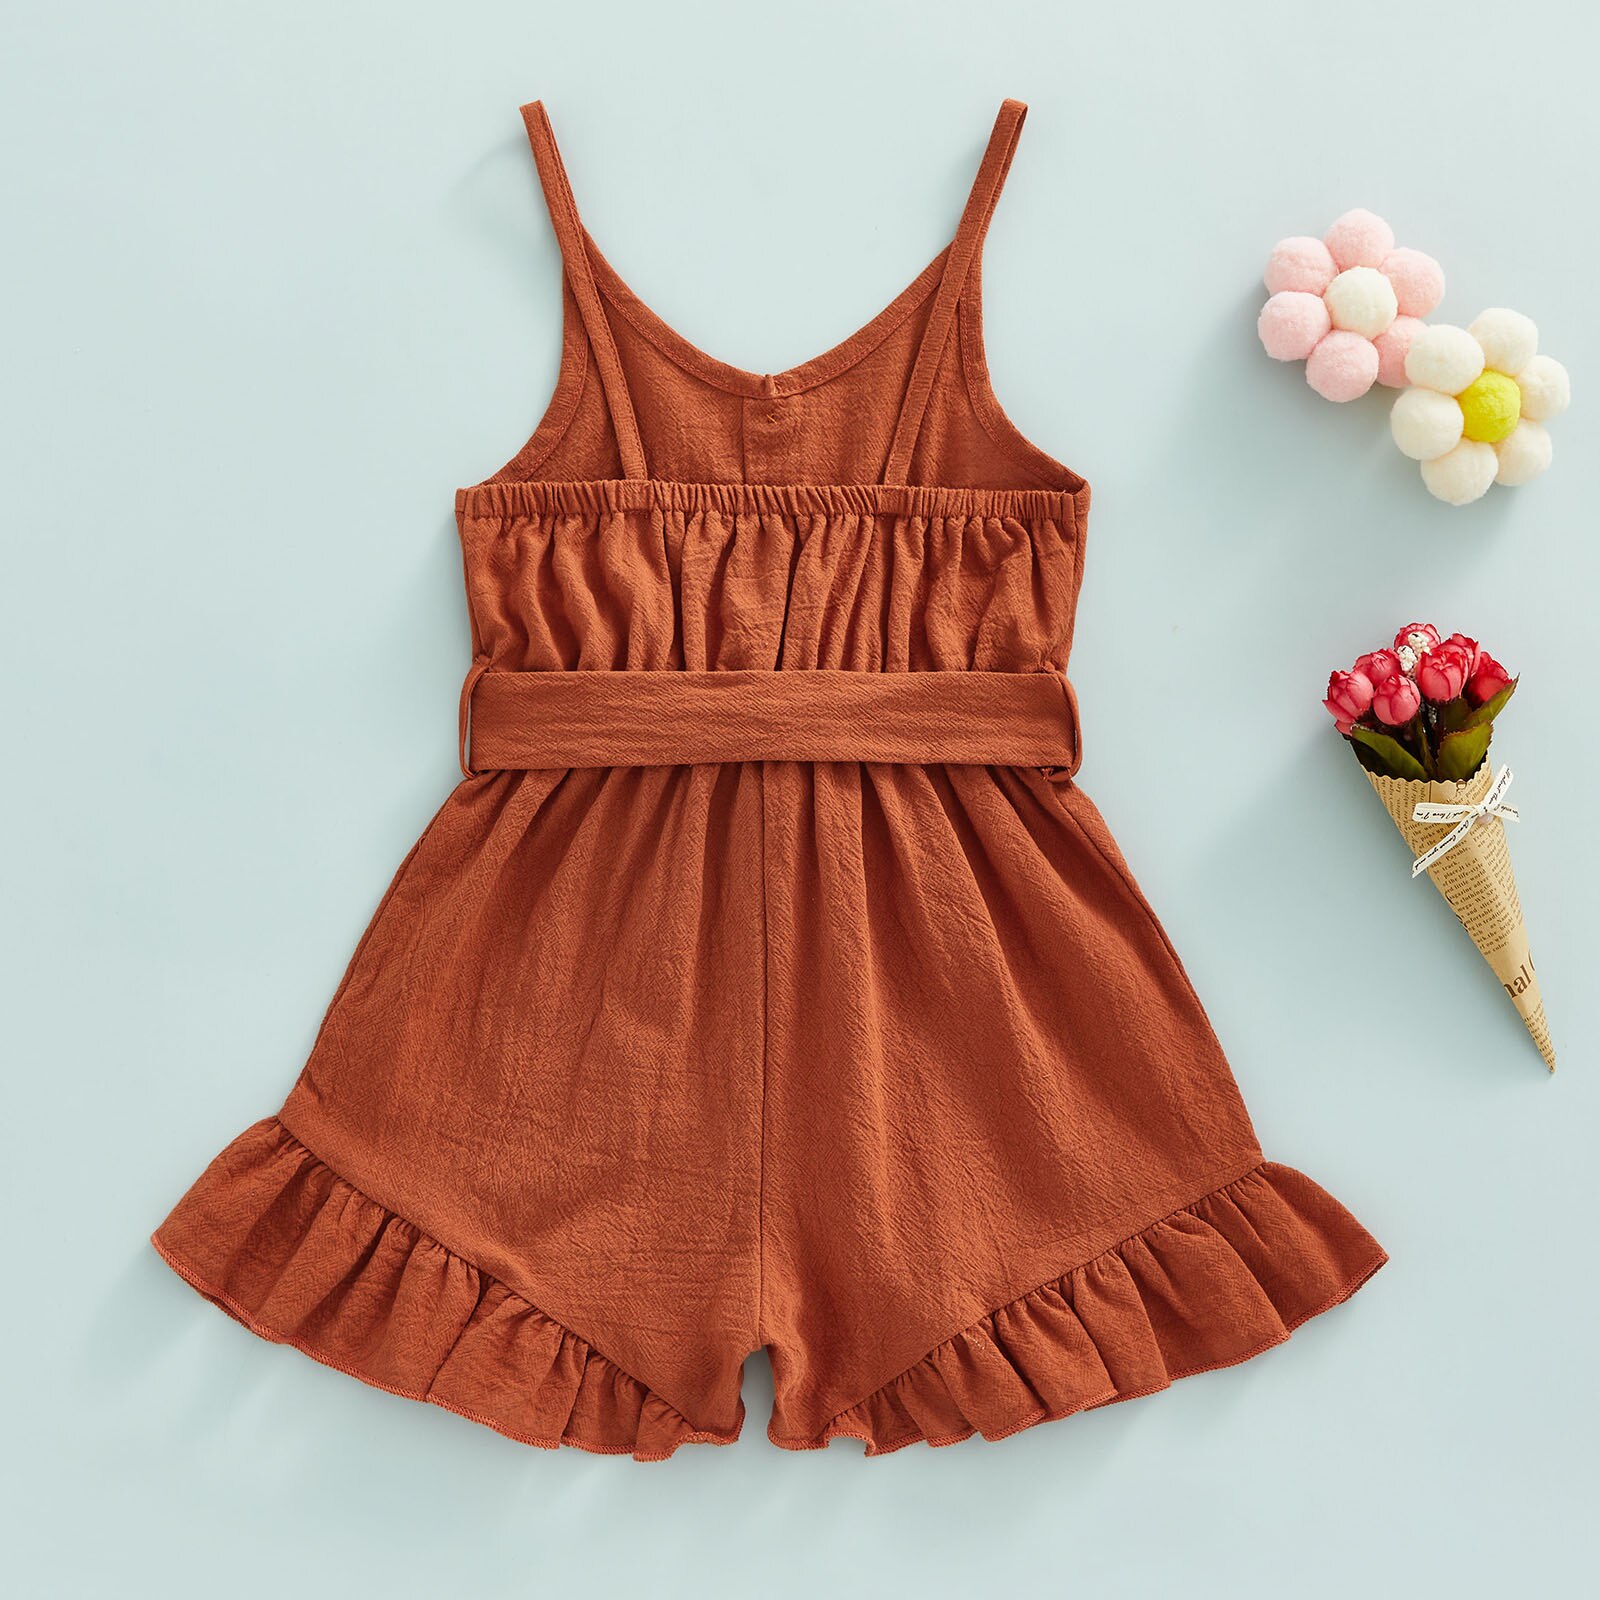 Toddler-Kid-Baby-Girls-Sling-Playsuit-Spaghetti-Straps-V-Neck-Buttons-Sleeveless-Ruffle-Hem-Solid-Color-4